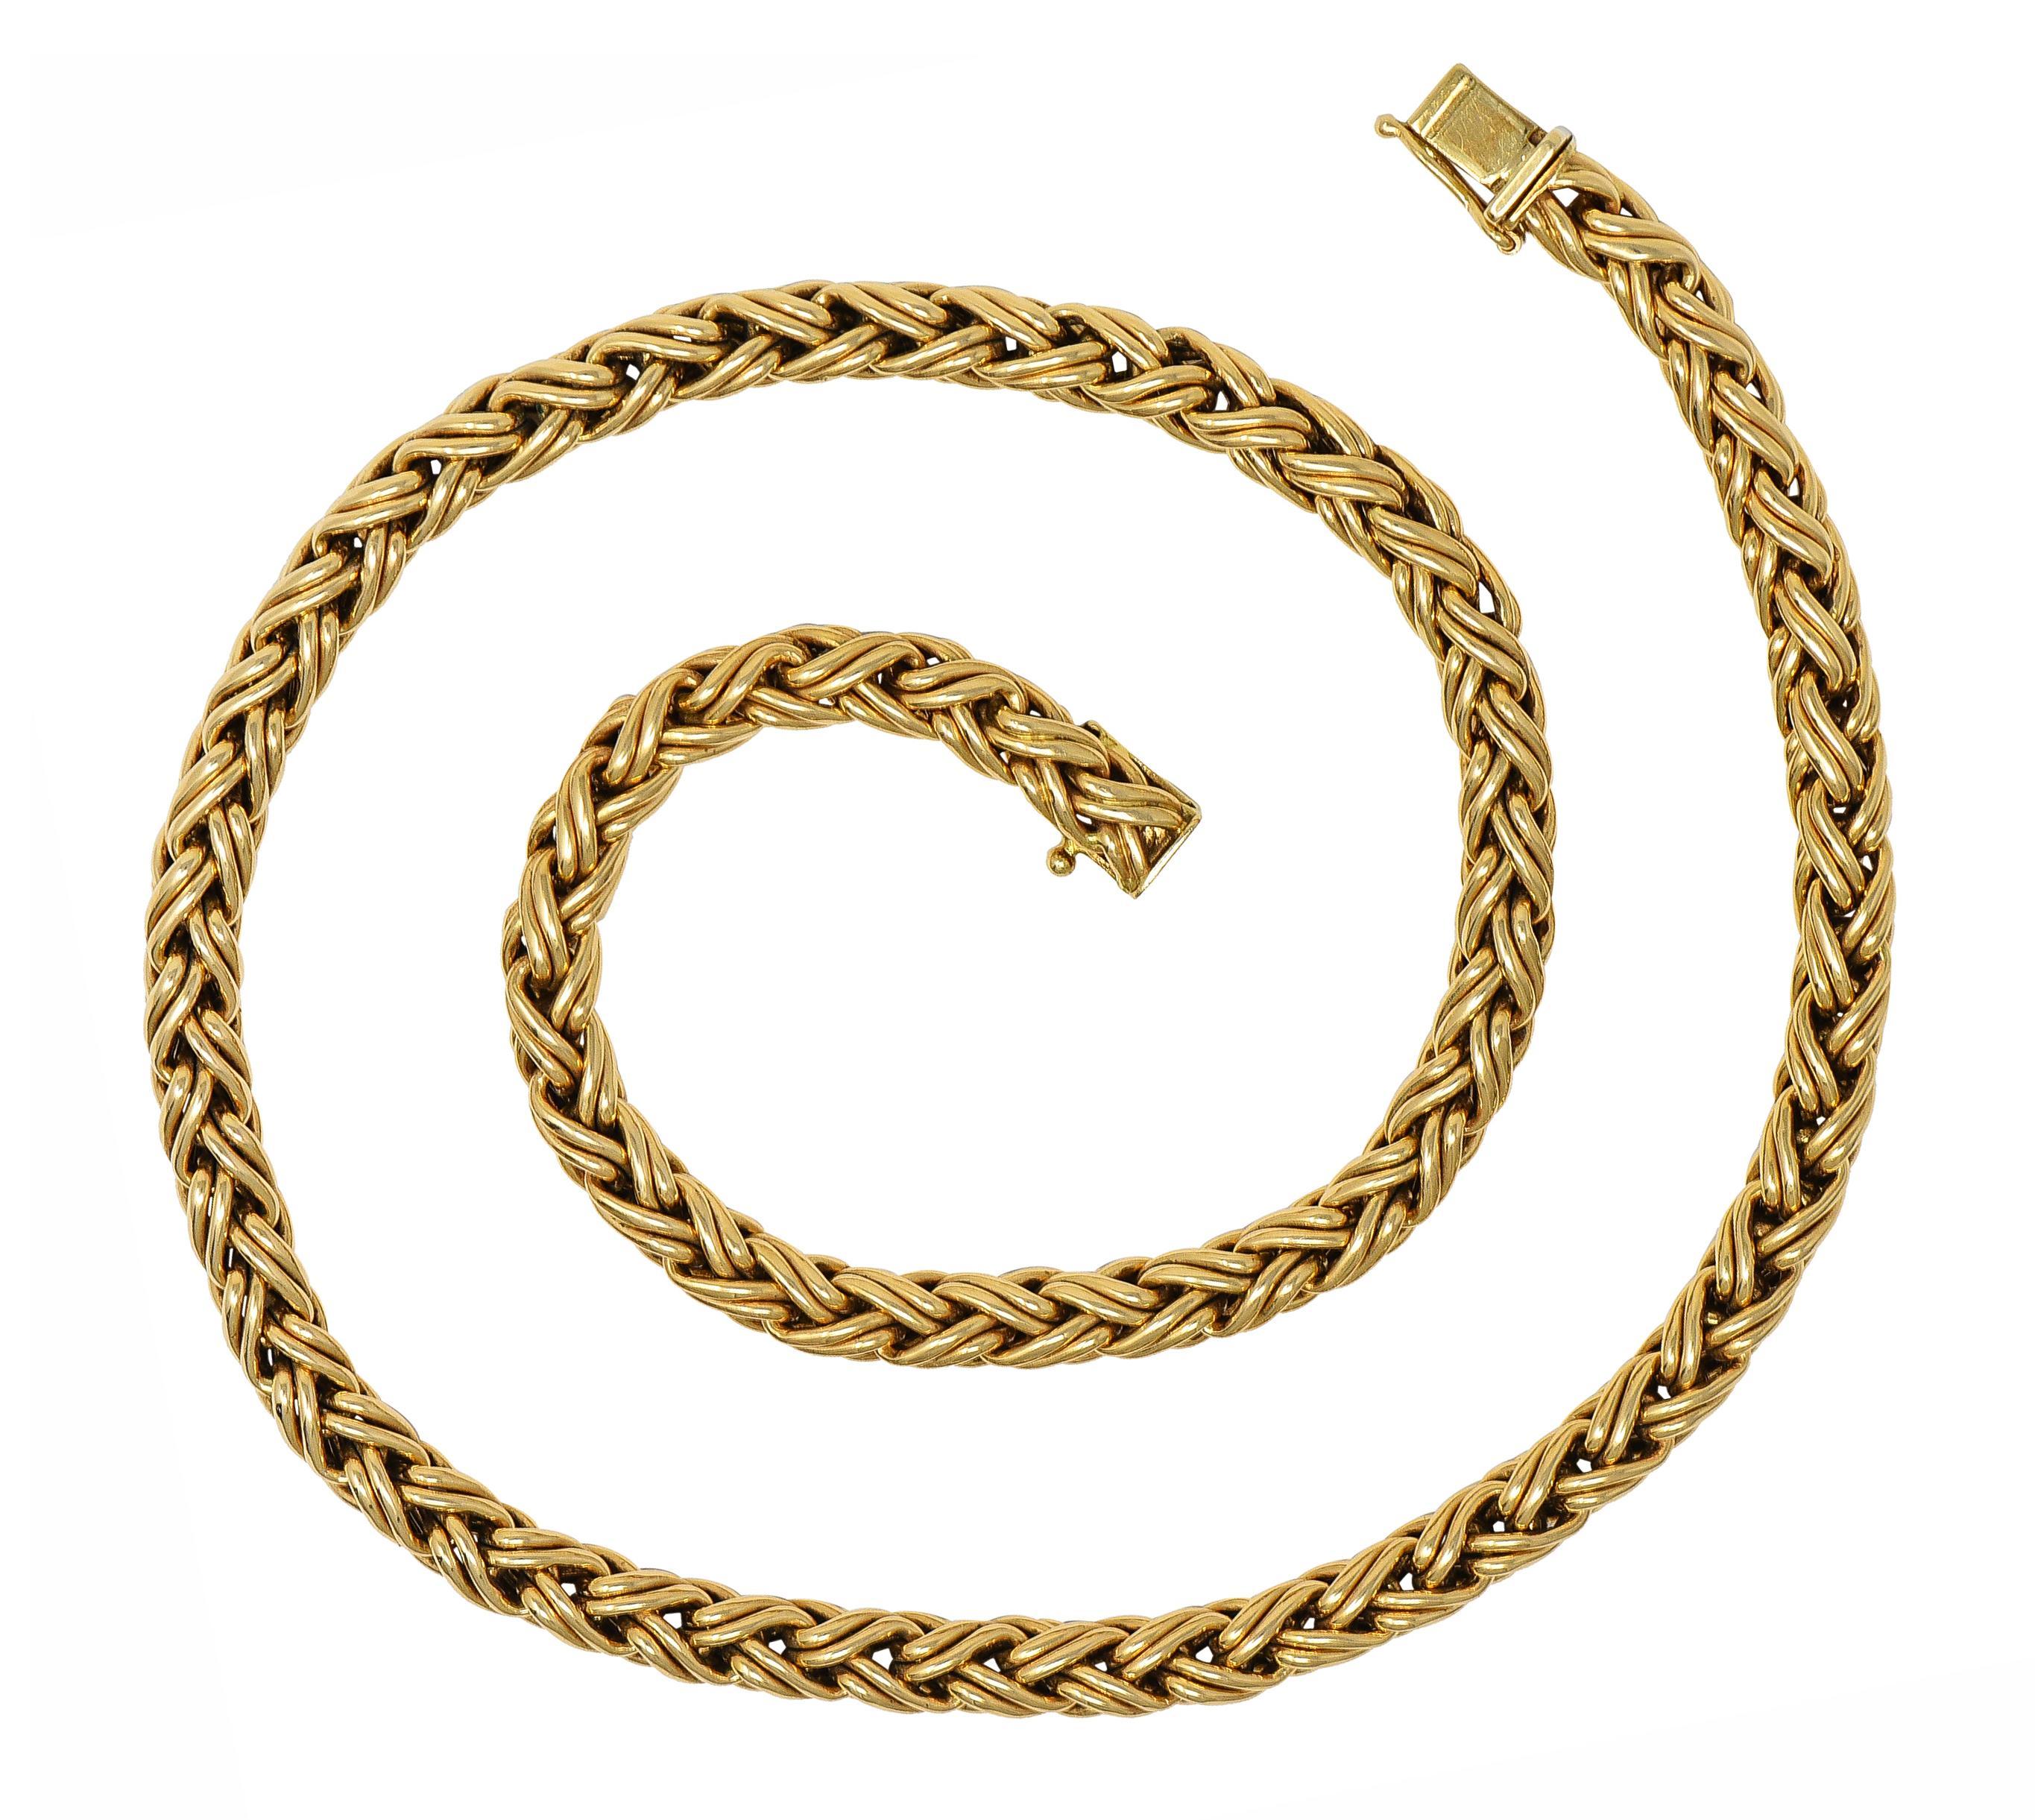 Designed as uniform Russian weave chain 
Comprised of meshed weave motif links
With high polish finish
Completed by concealed clasp closure
With figure eight safety
Stamped for 14 karat gold
Fully signed Tiffany & Co.
Circa: 1990's
Width: 1/4 inch